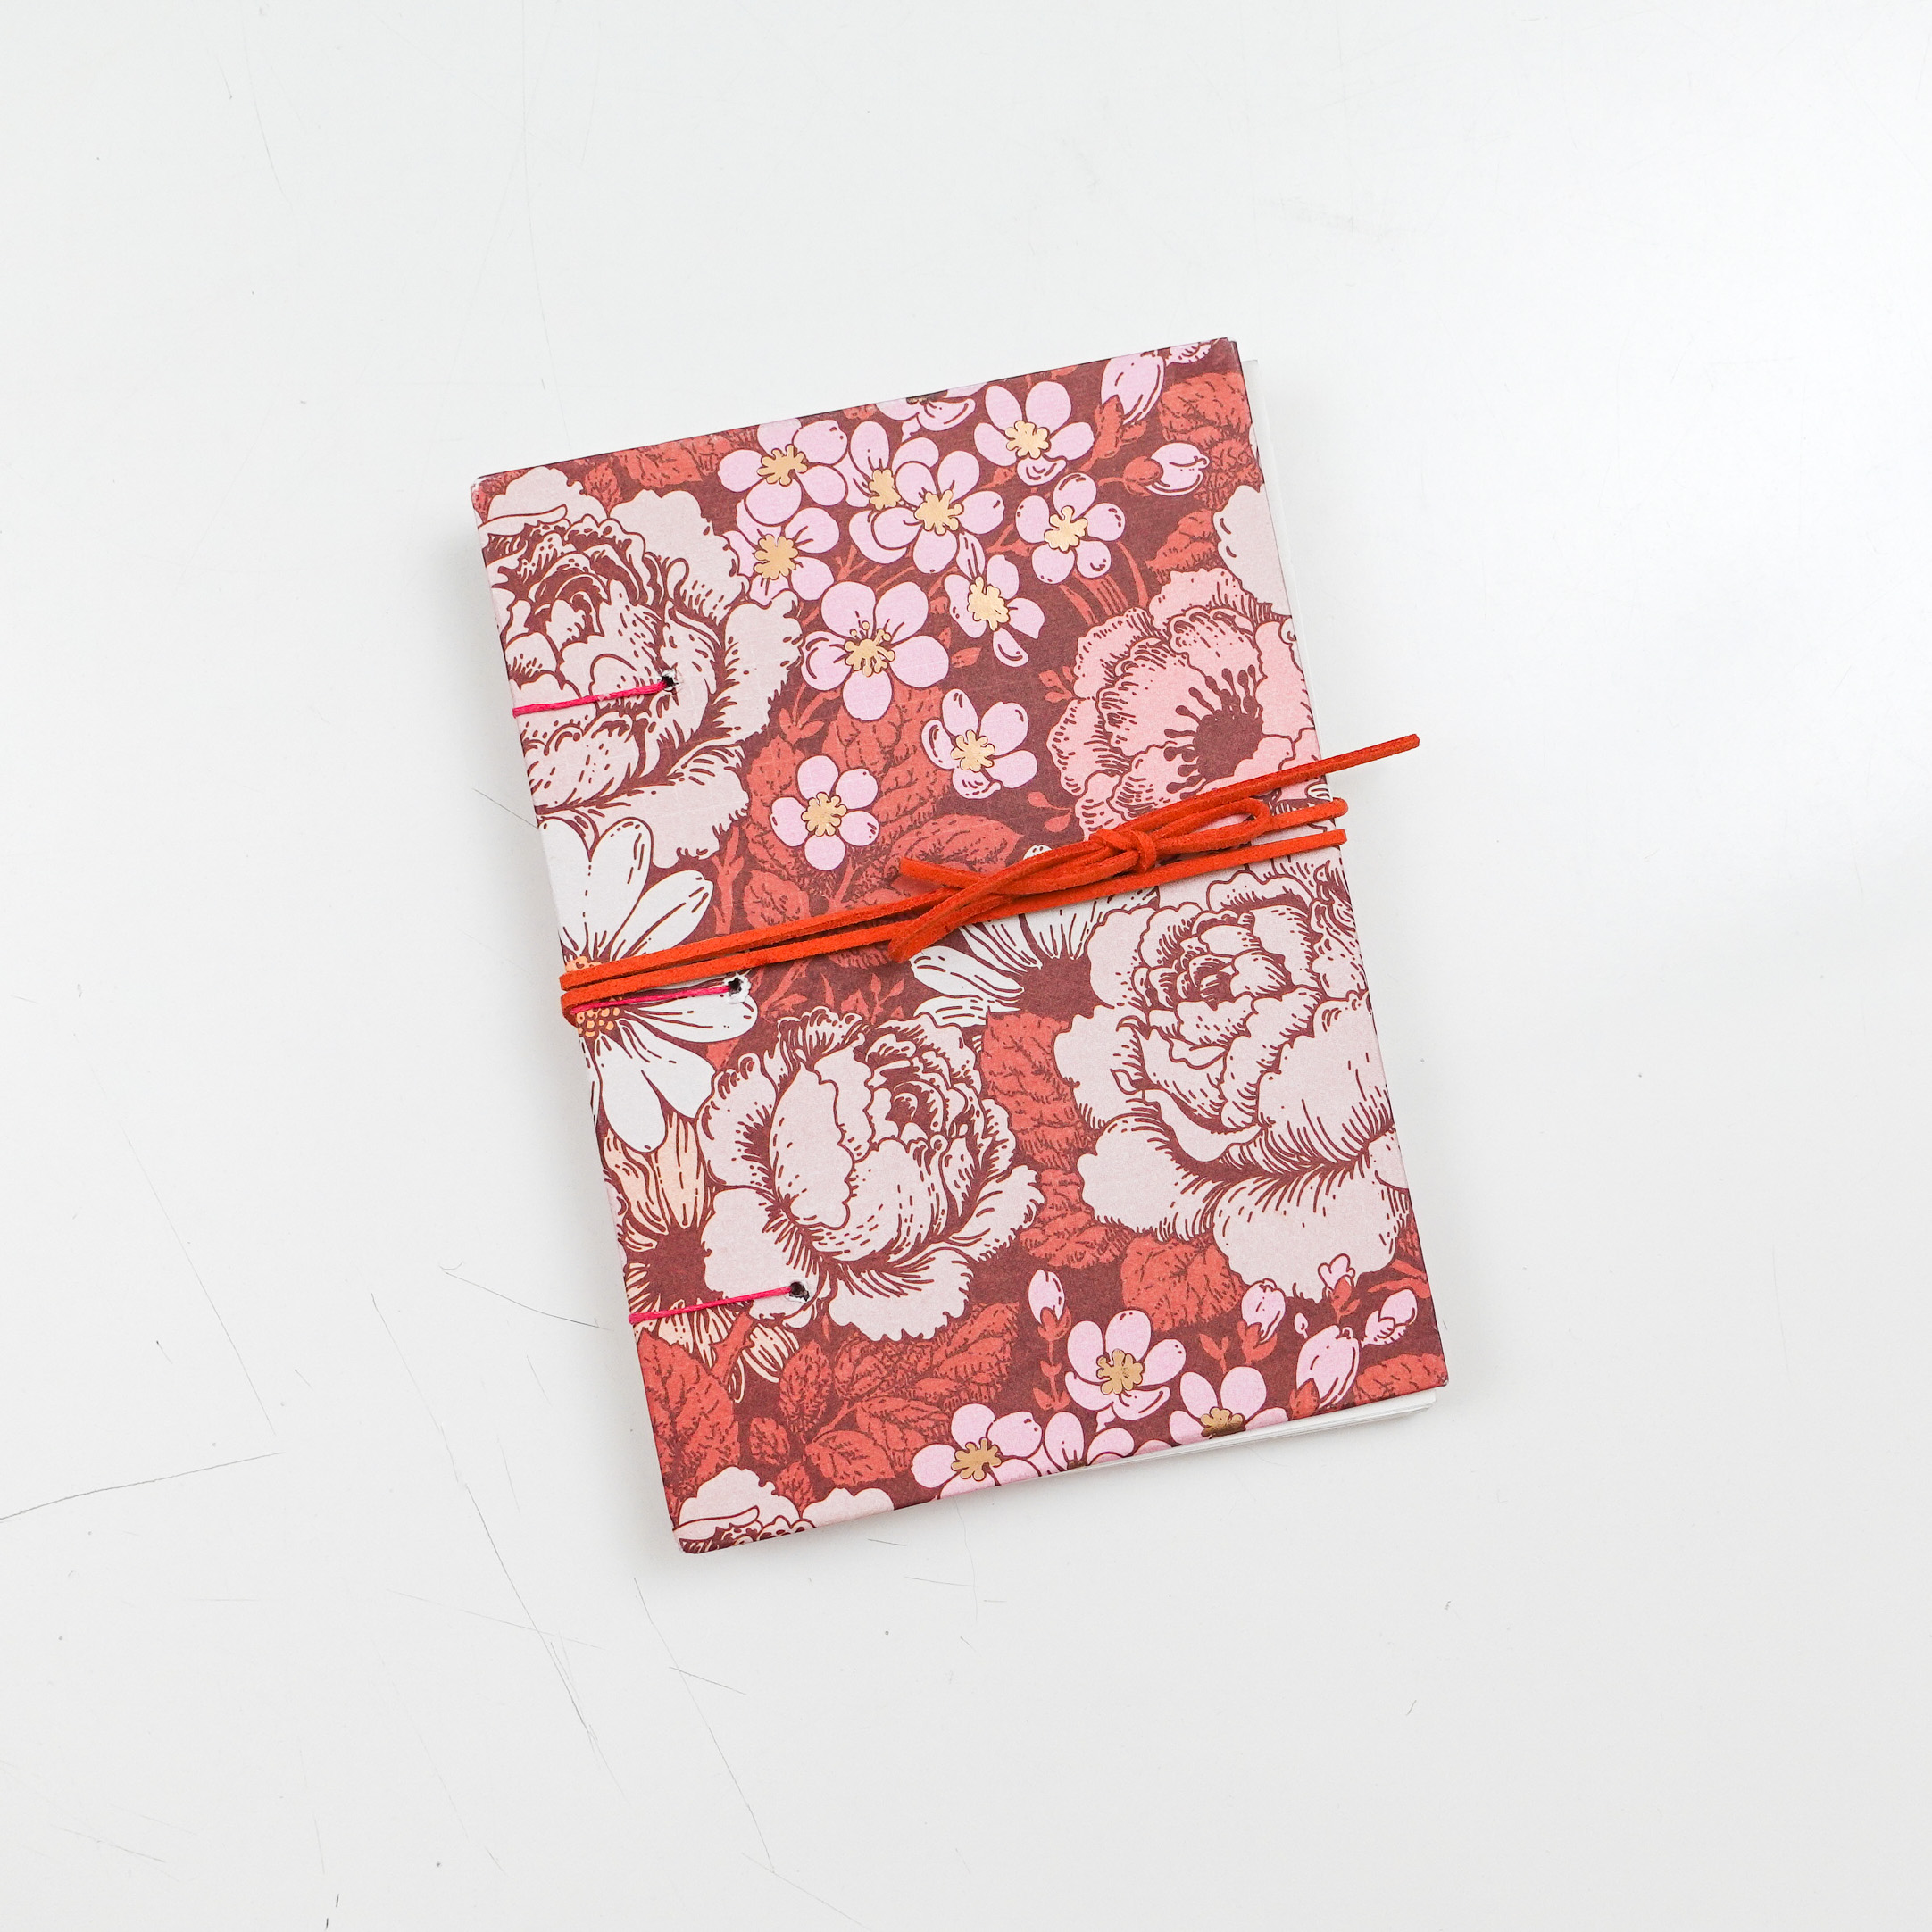 Homemade Sketchbook with a floral pattern and a ribbon closure